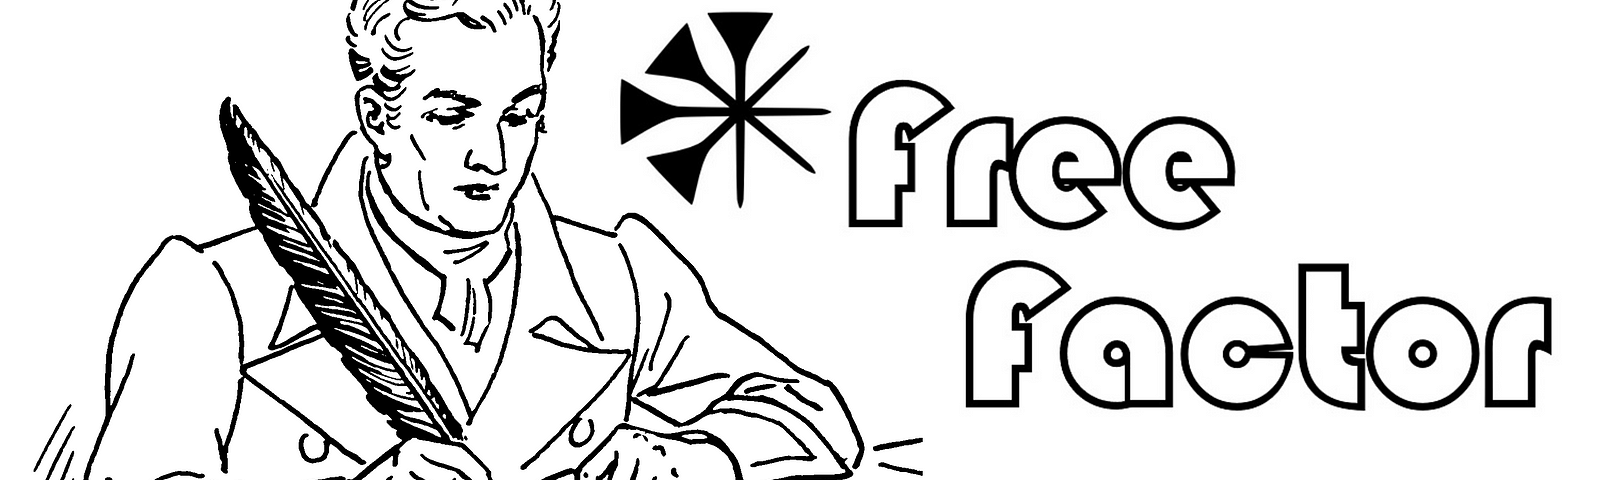 Man writing with quill next to Free Factor logo